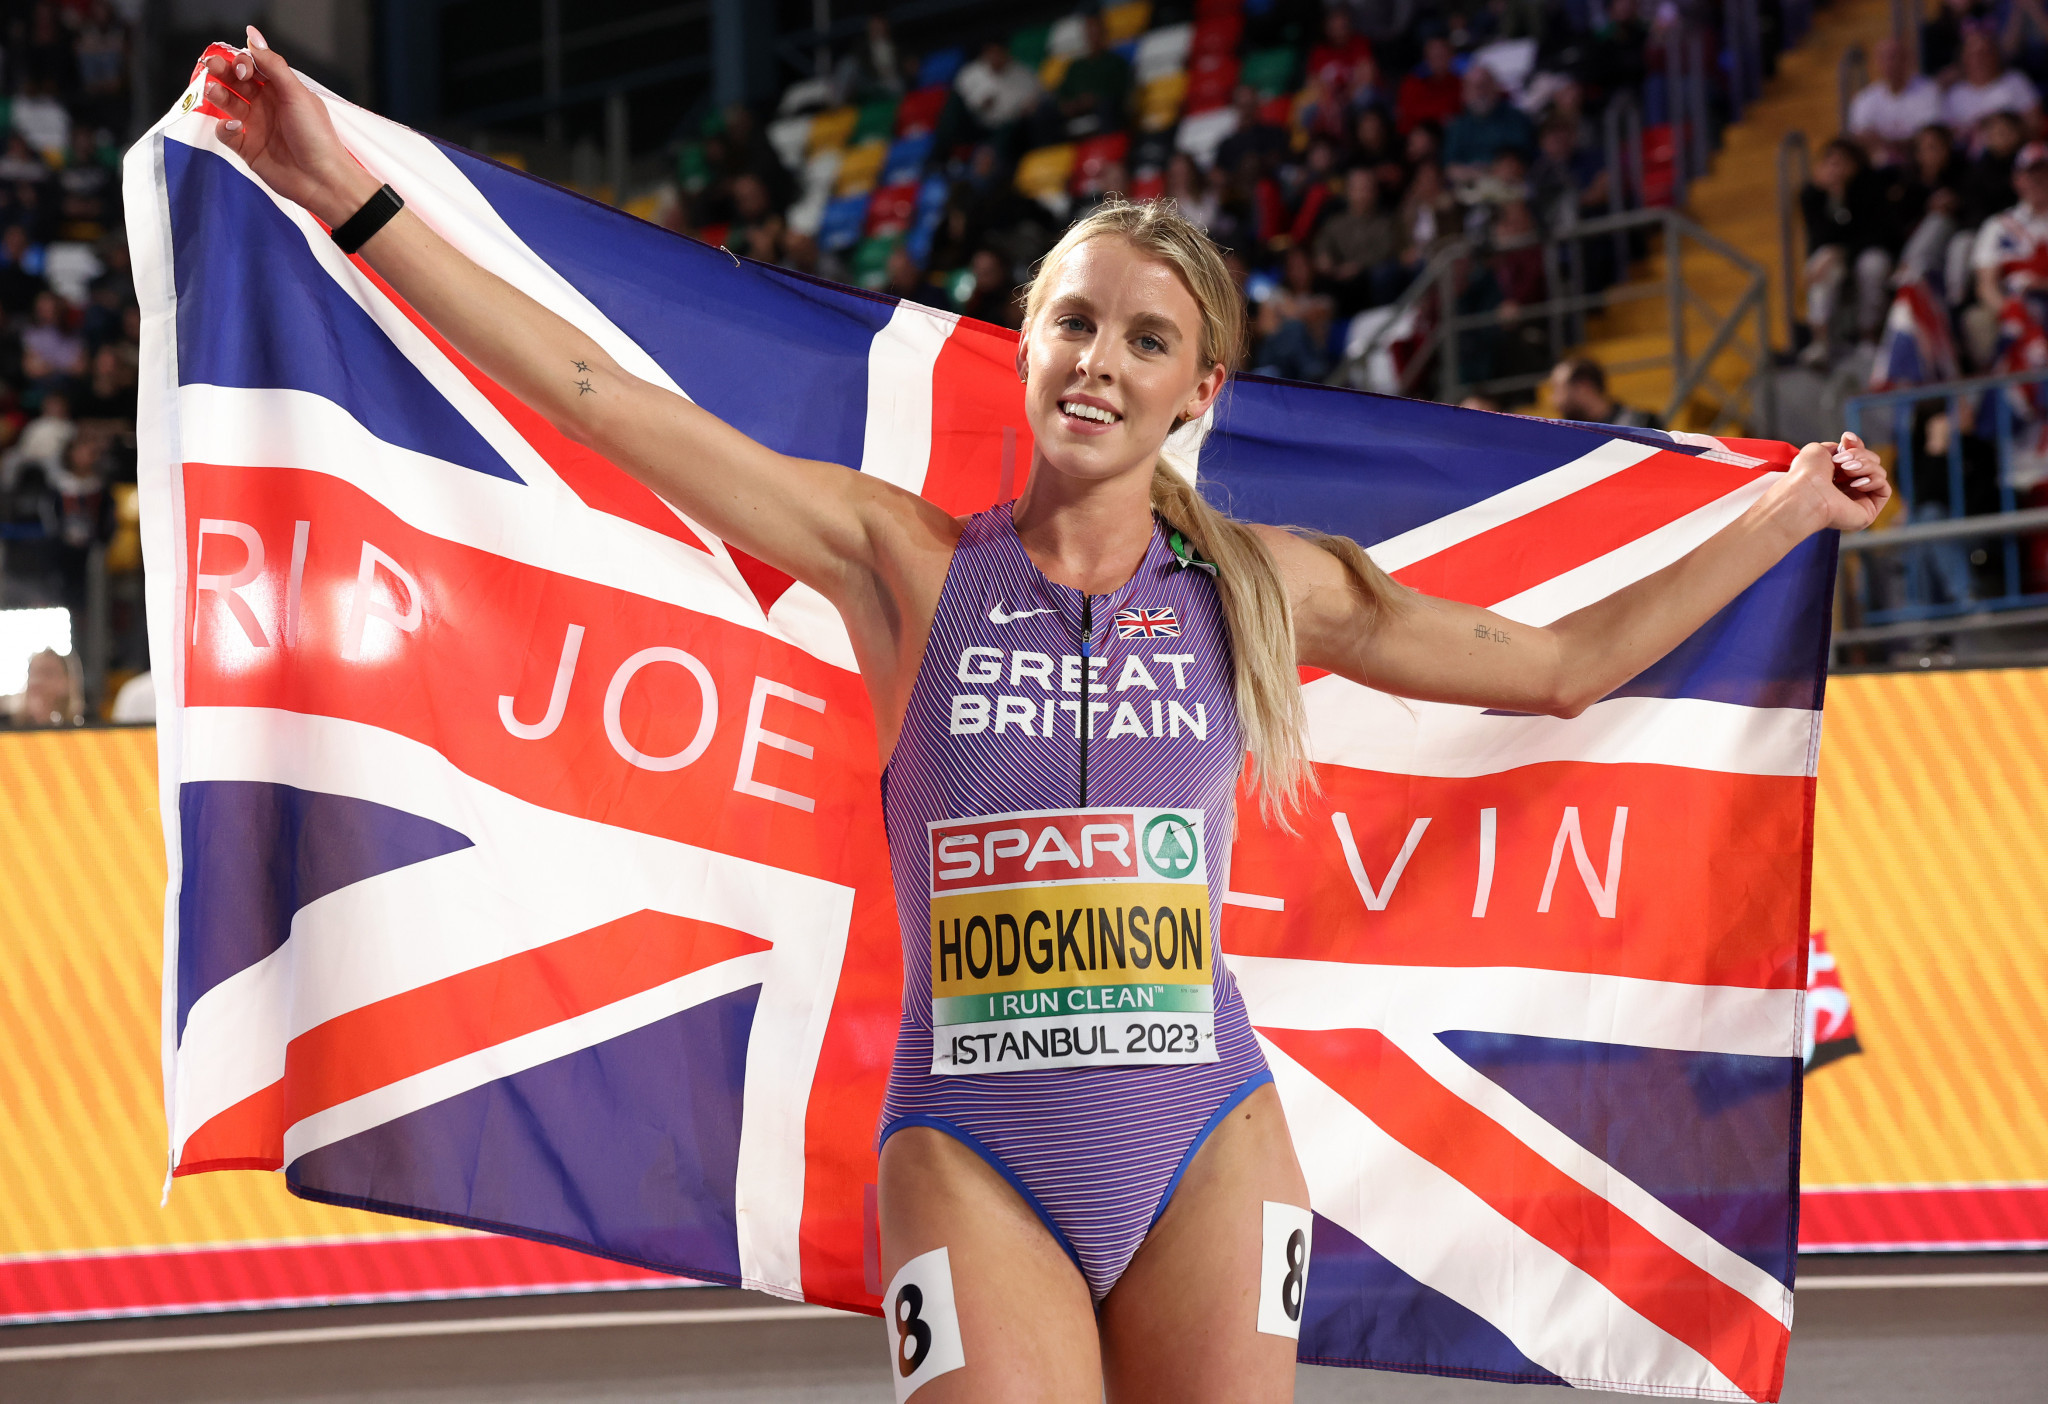 Keely Hodgkinson paid tribute to her former coach Joe Galvin after winning the women's 800 metres ©Getty Images